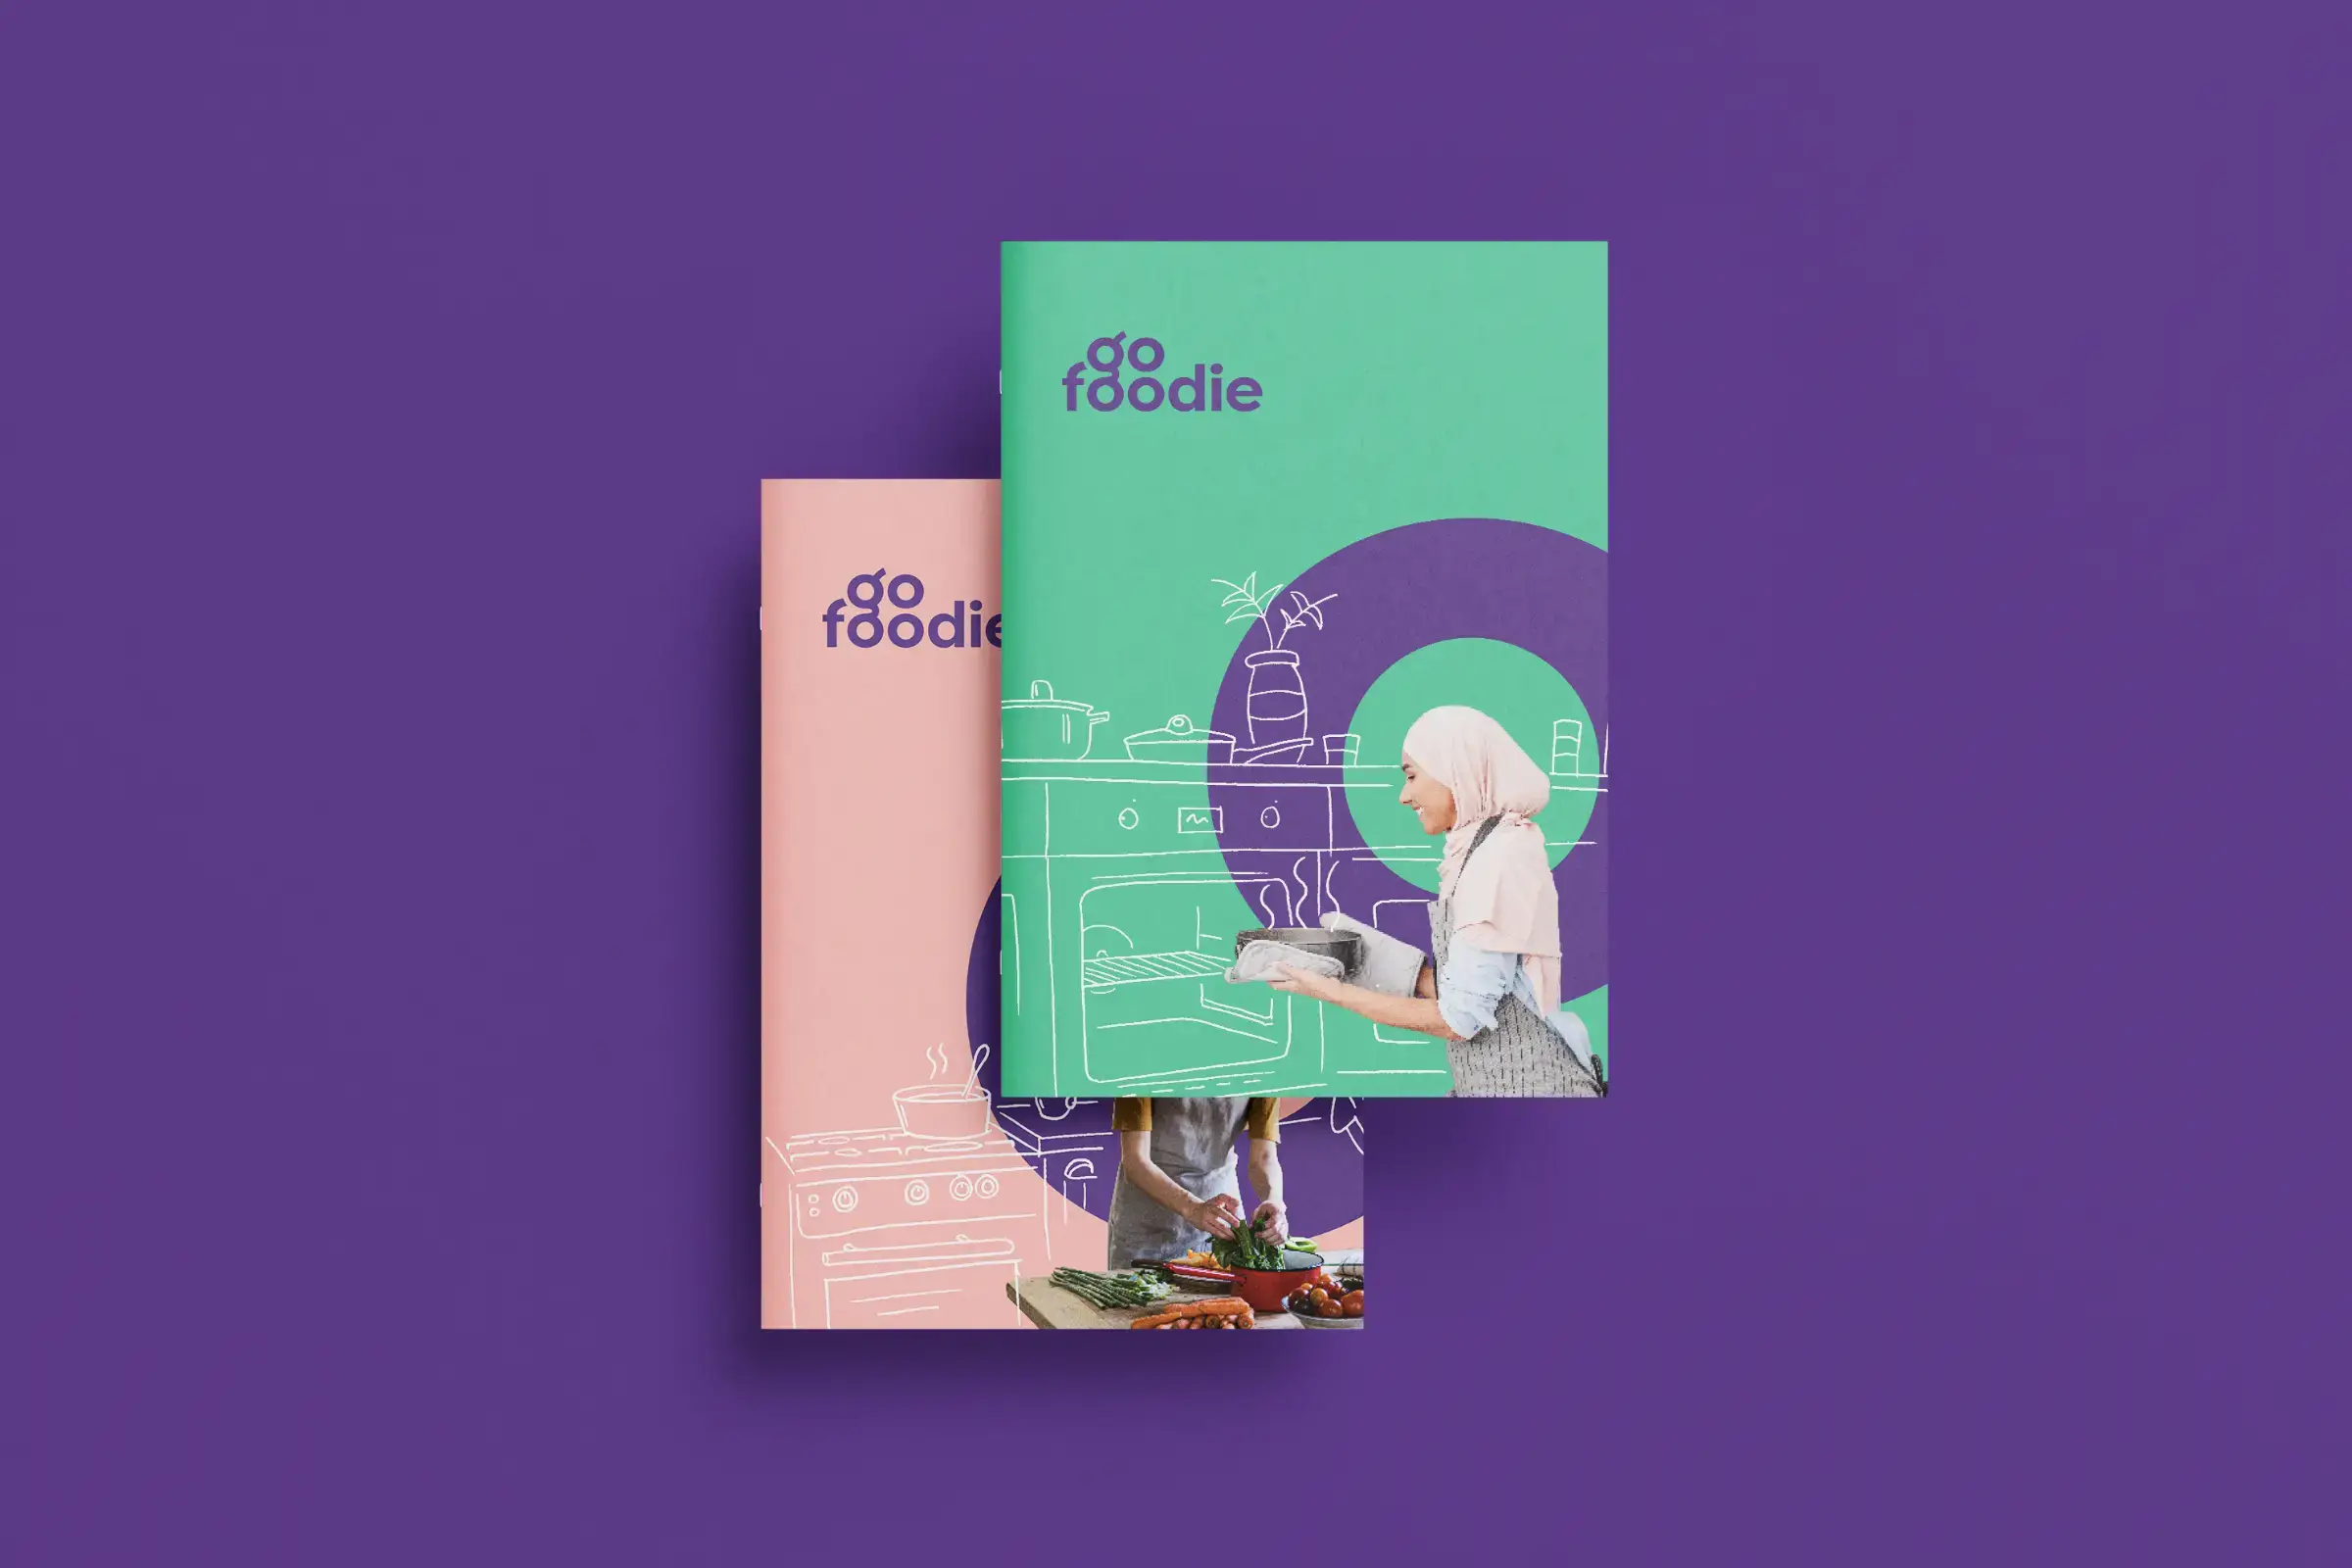 GoFoodie brand identity visuals by Ten Fathoms